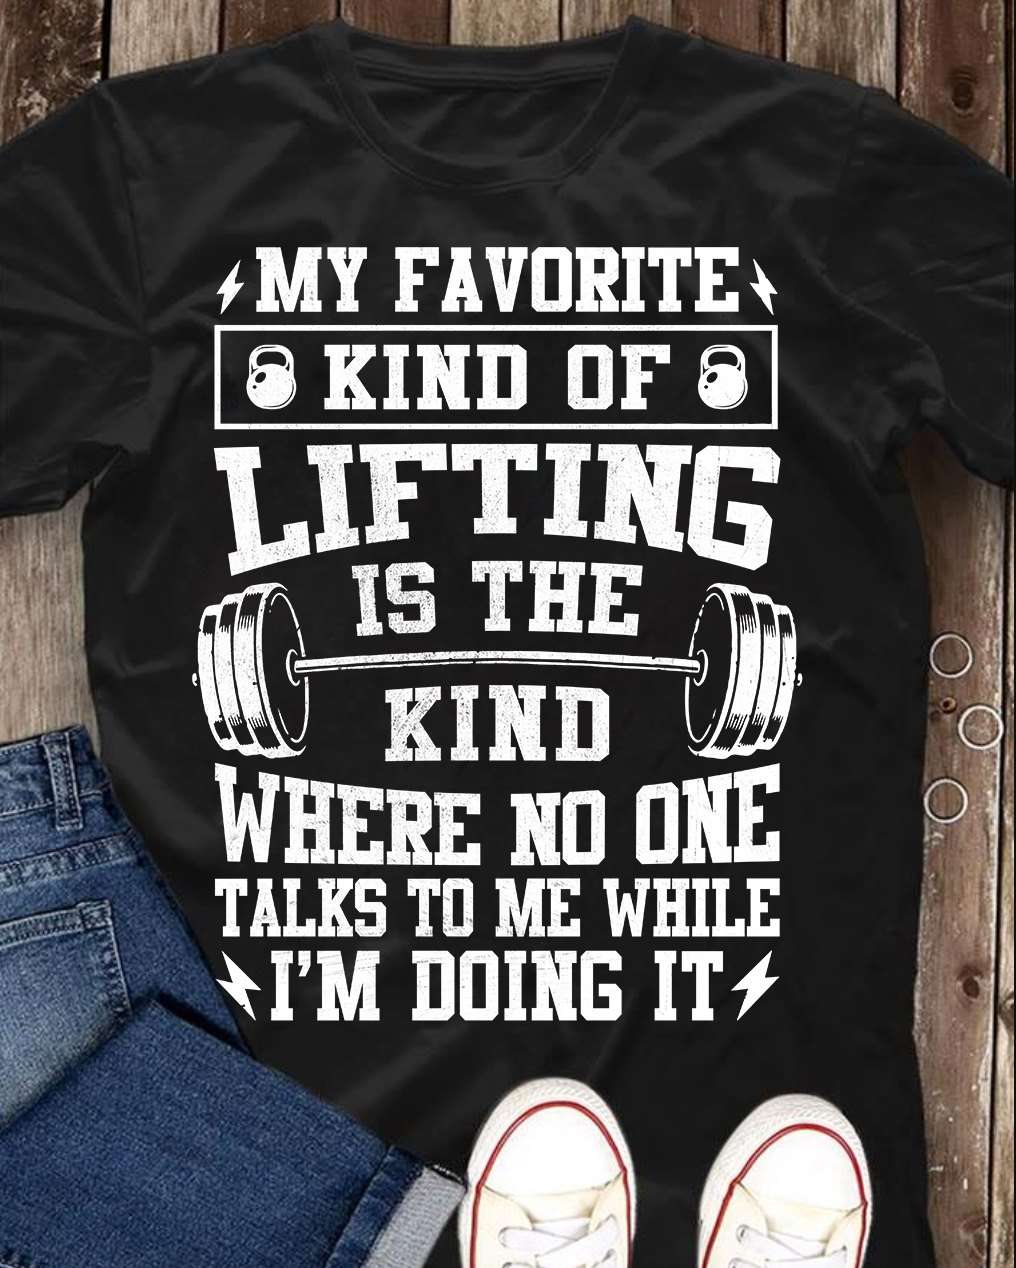 My favourite kind of lifting is the kind where no one talks to me while i'm doing it